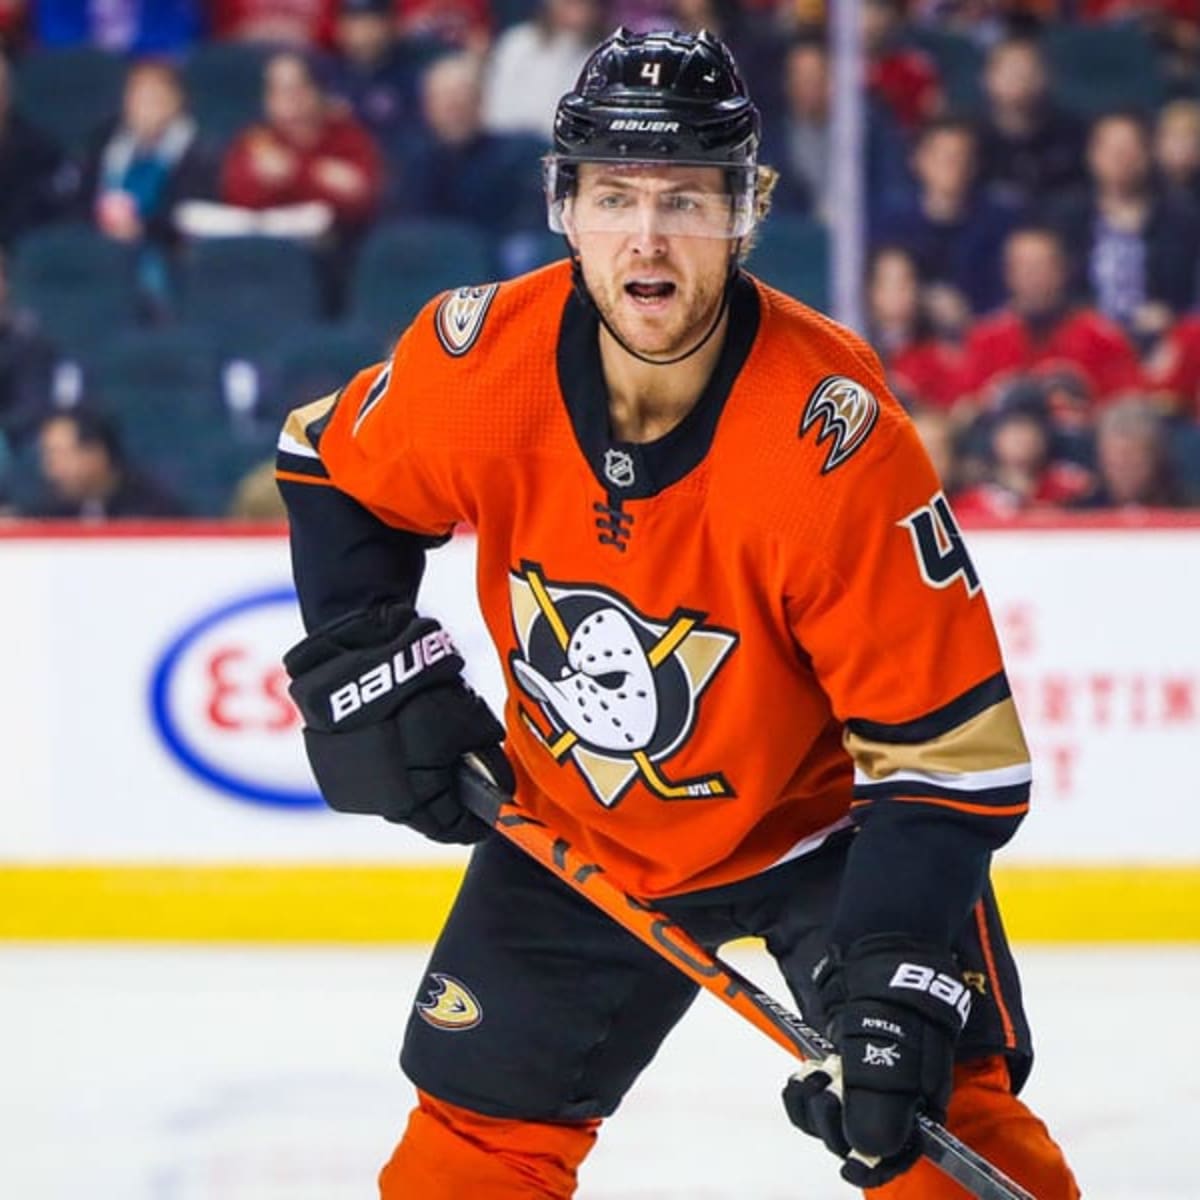 For a guy who was washed up in 2019, Corey Perry is a heckuva player